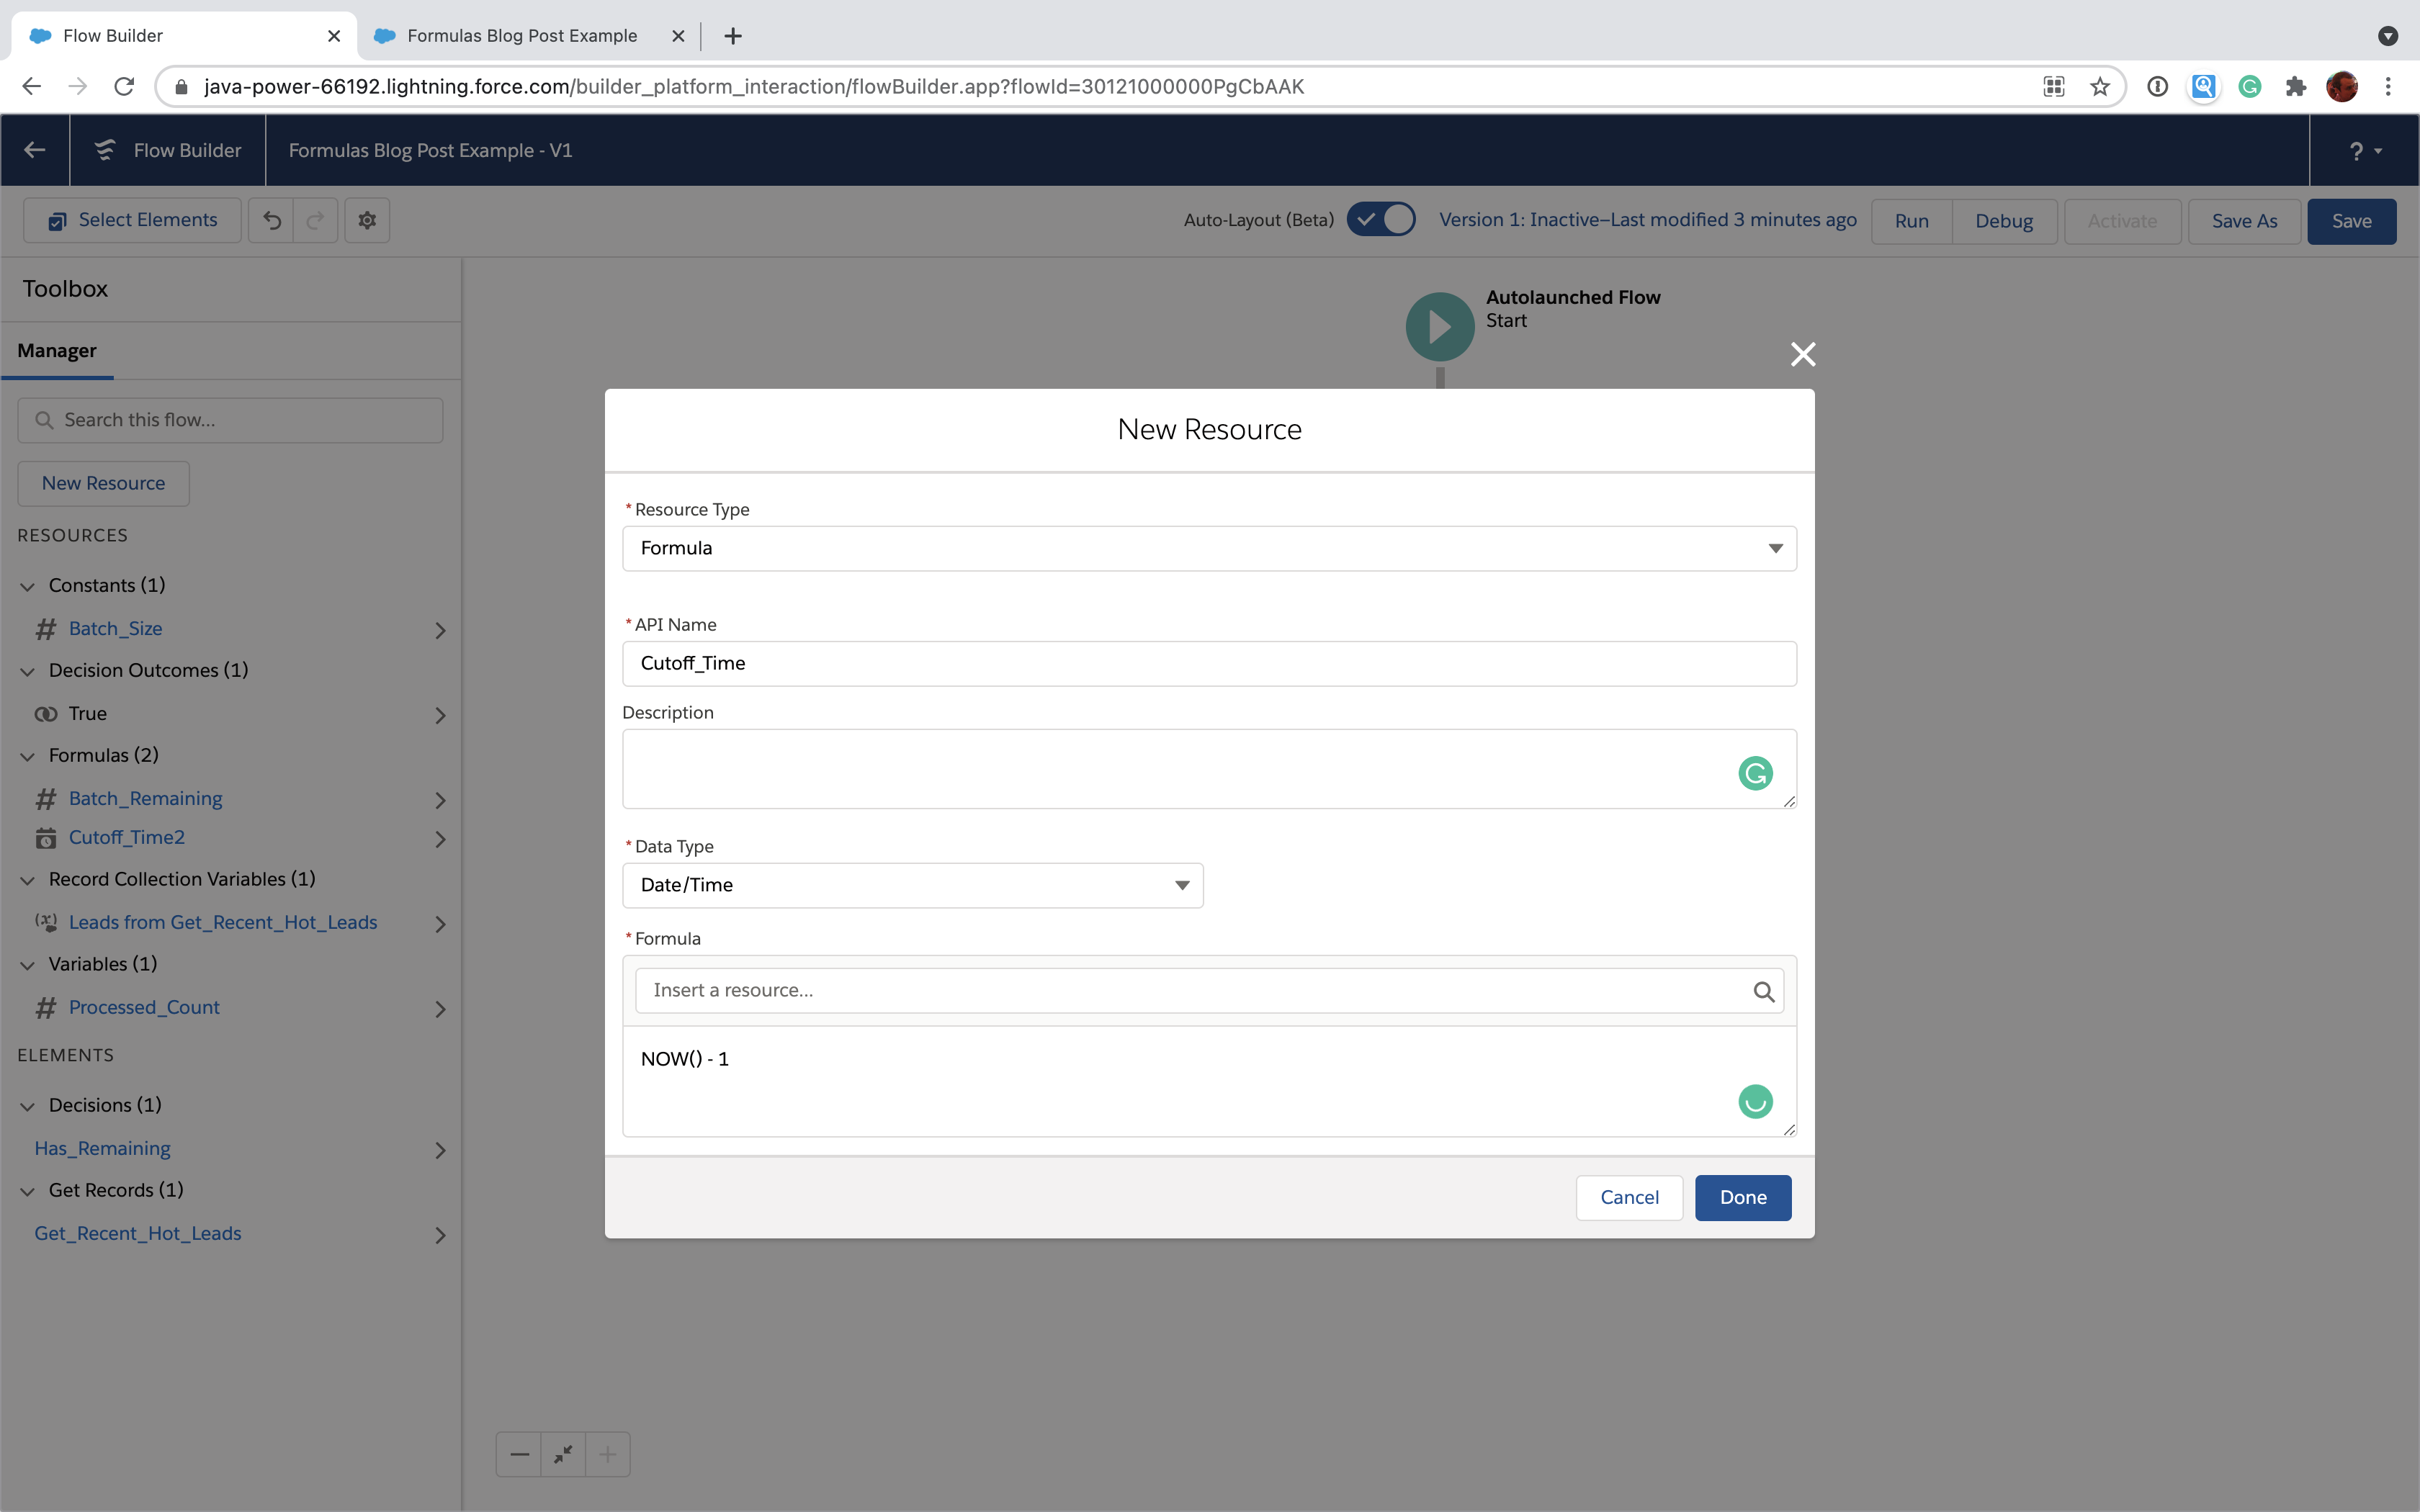 How to use formulas in Salesforce Flow